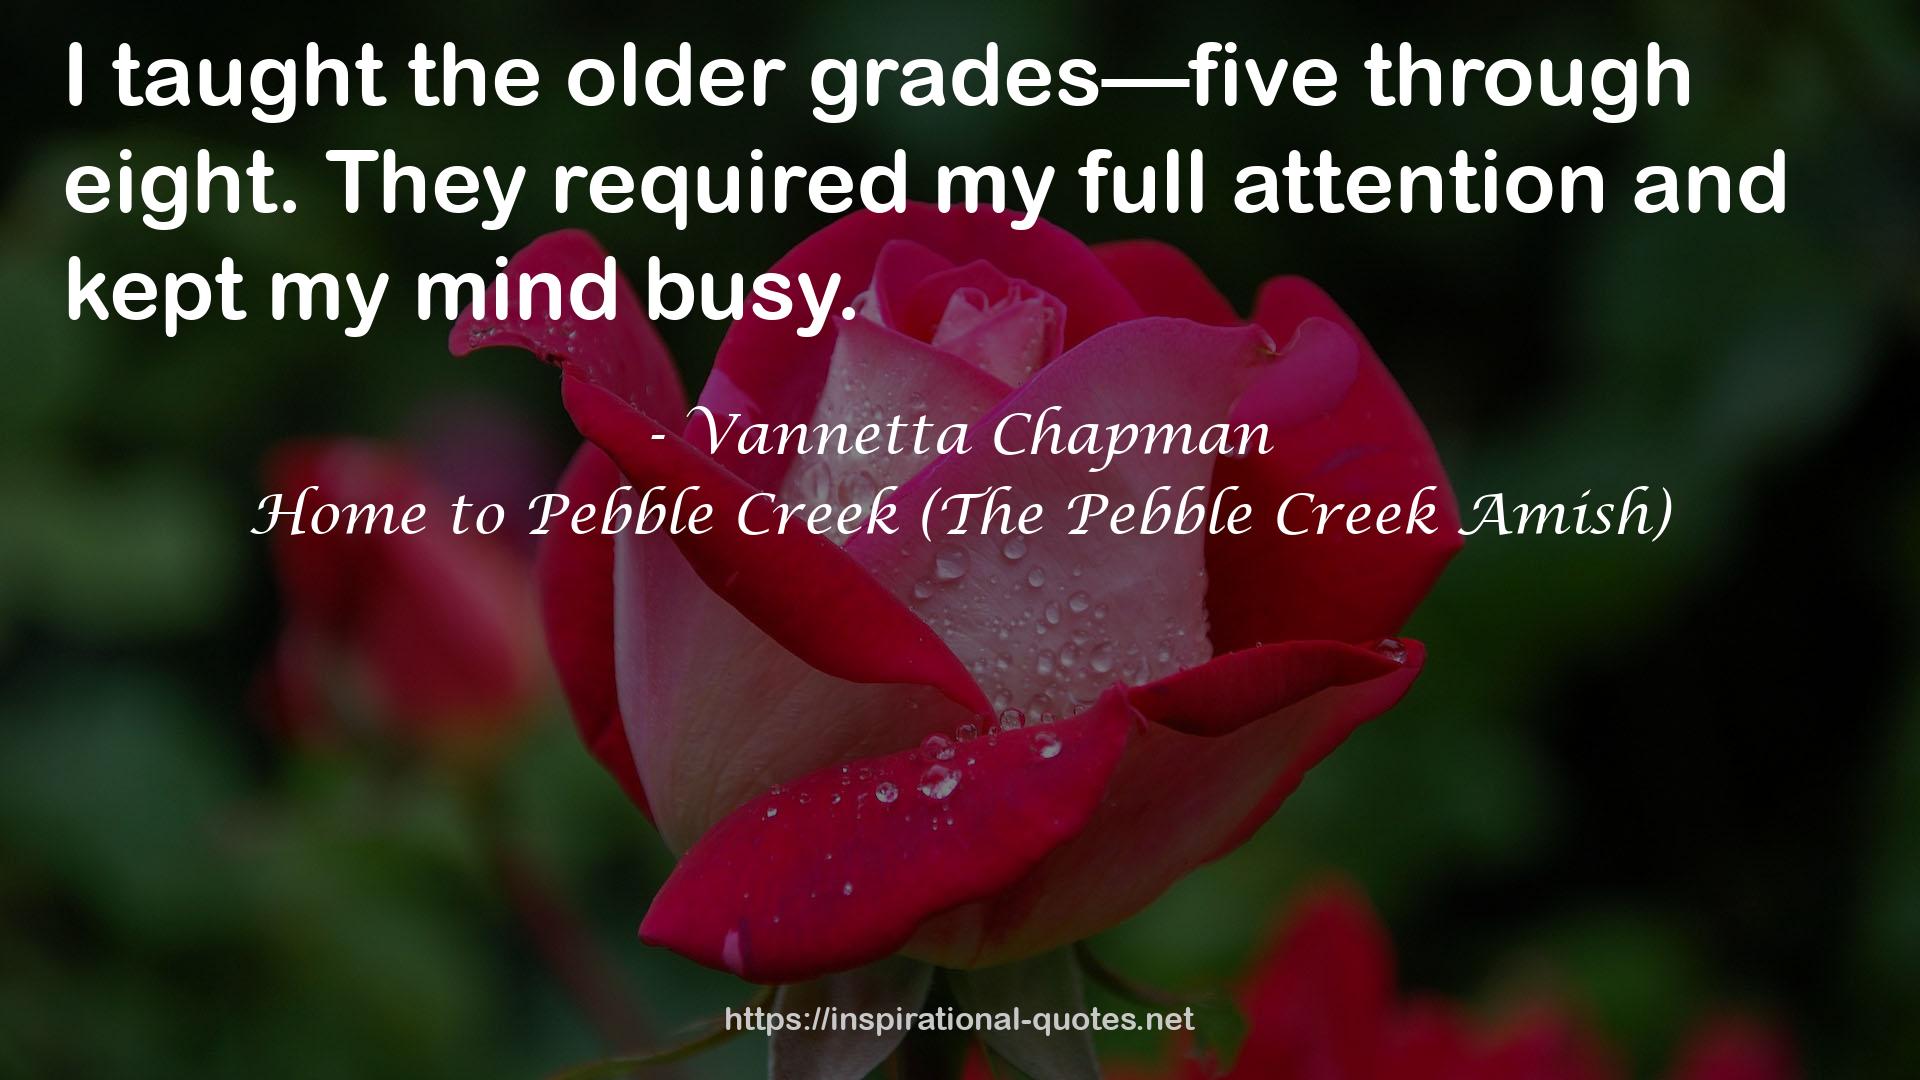 Home to Pebble Creek (The Pebble Creek Amish) QUOTES